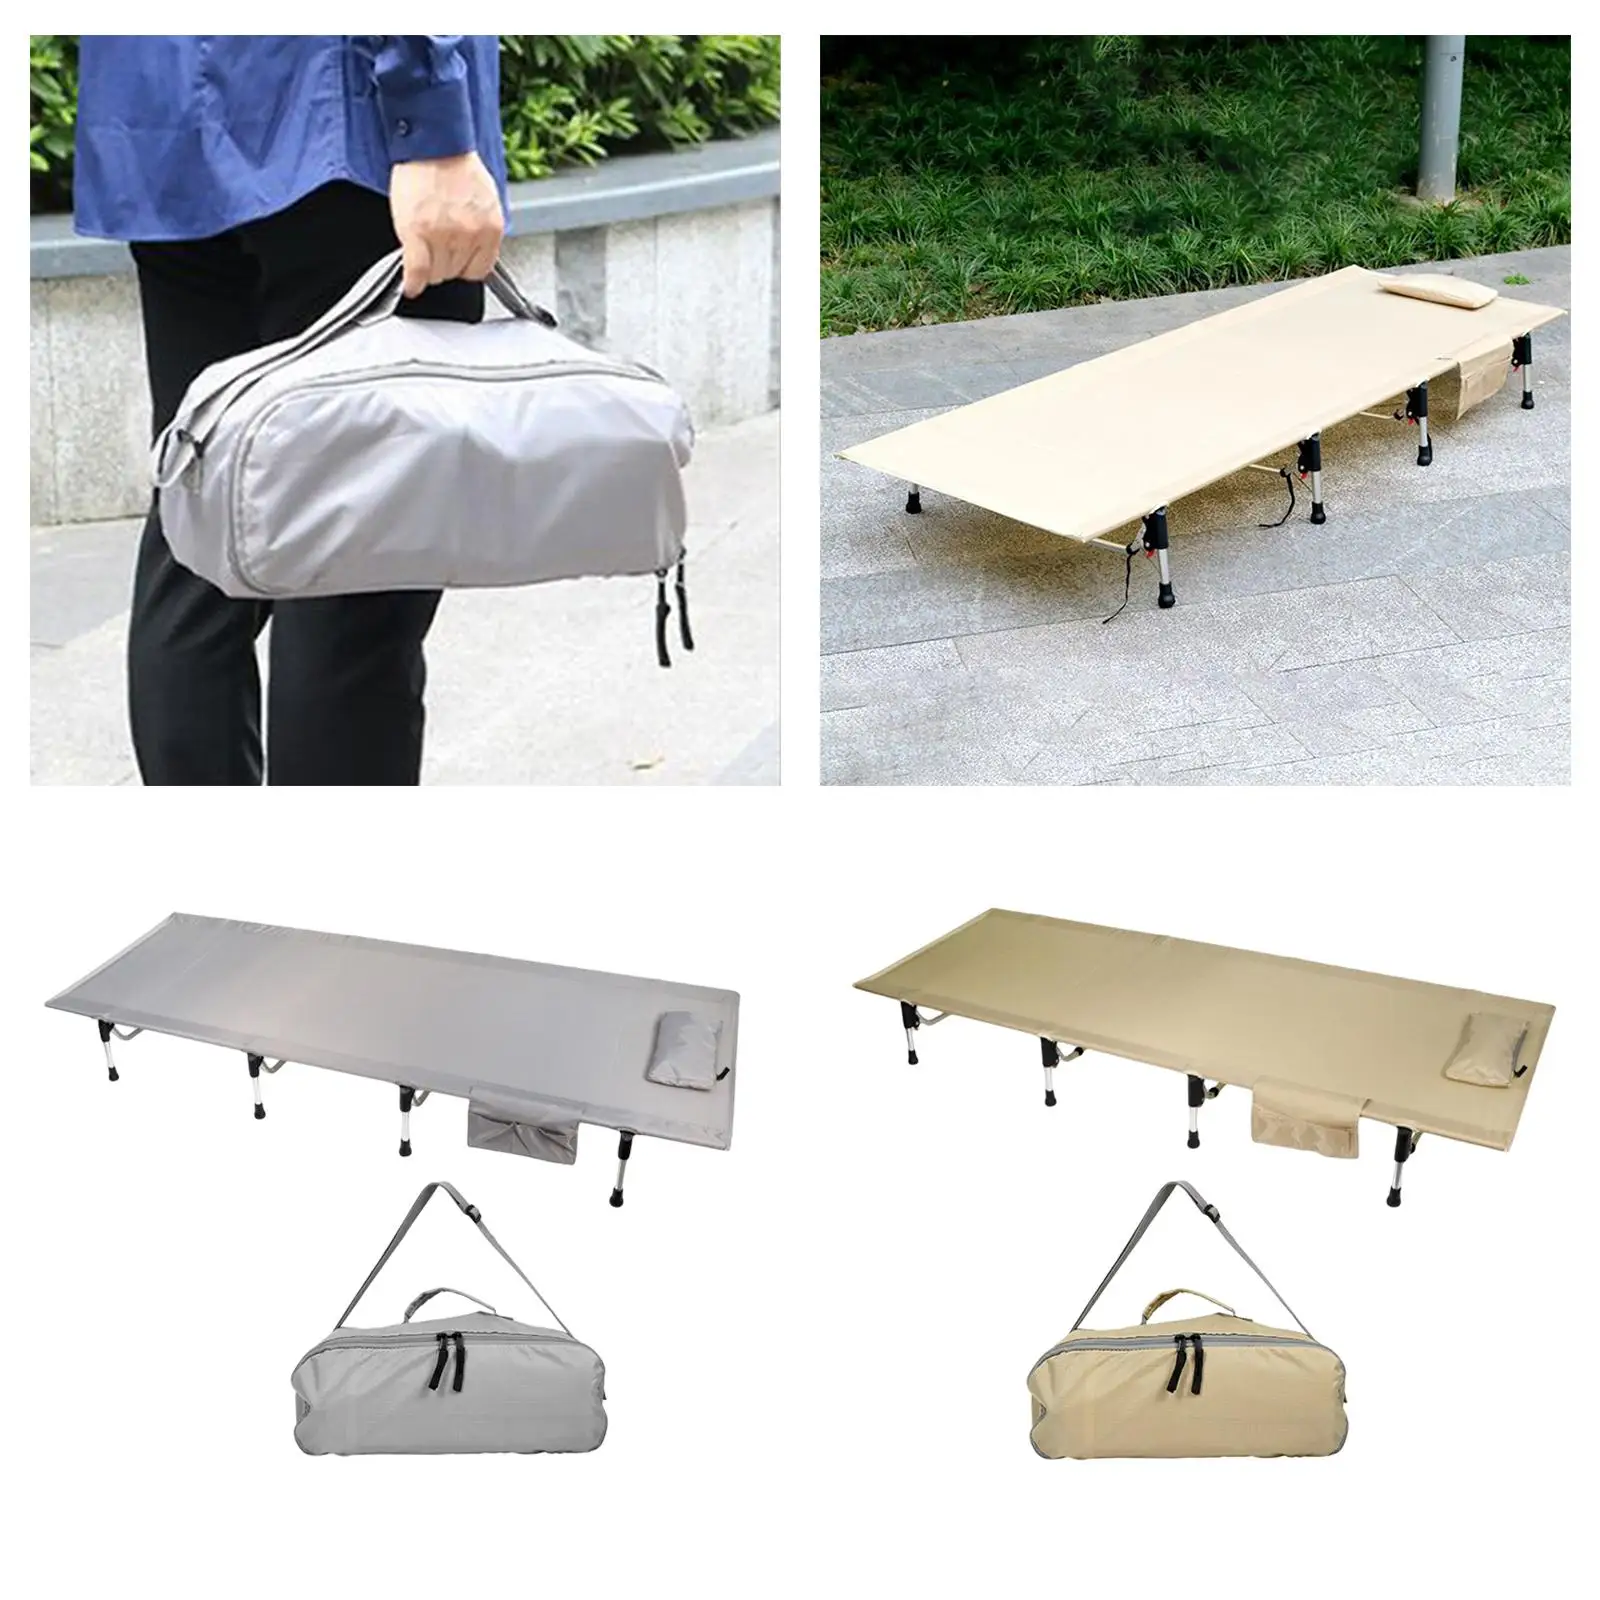 185cm Folding Camping Cot Lightweight 25.6`` Wide Foldable Sleeping Bed Cots for Mountaineering Beach Backpacking Office Travel